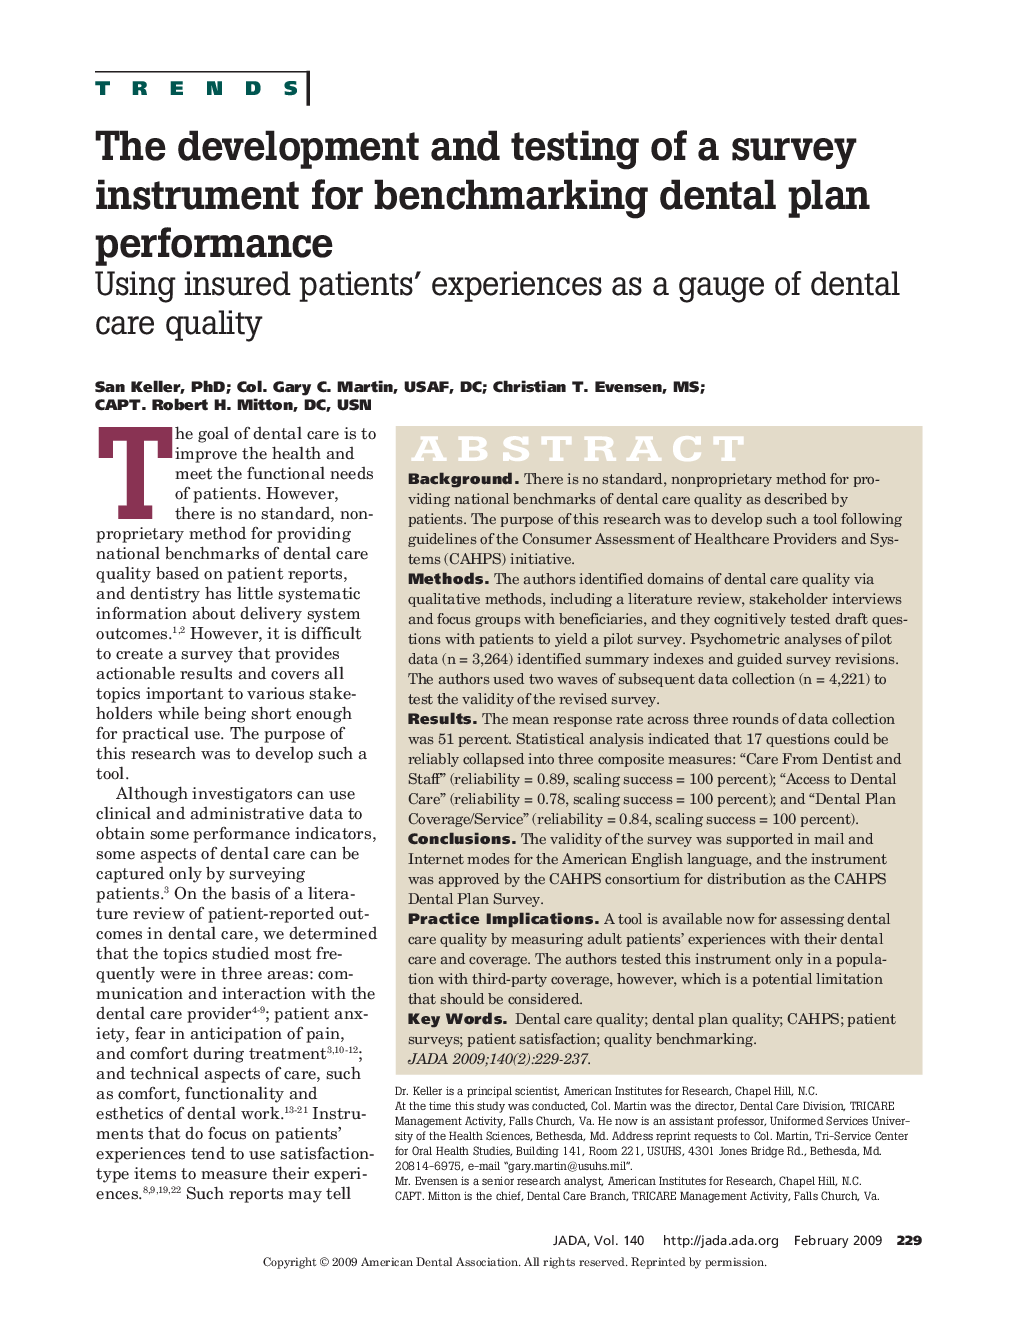 The development and testing of a survey instrument for benchmarking dental plan performance